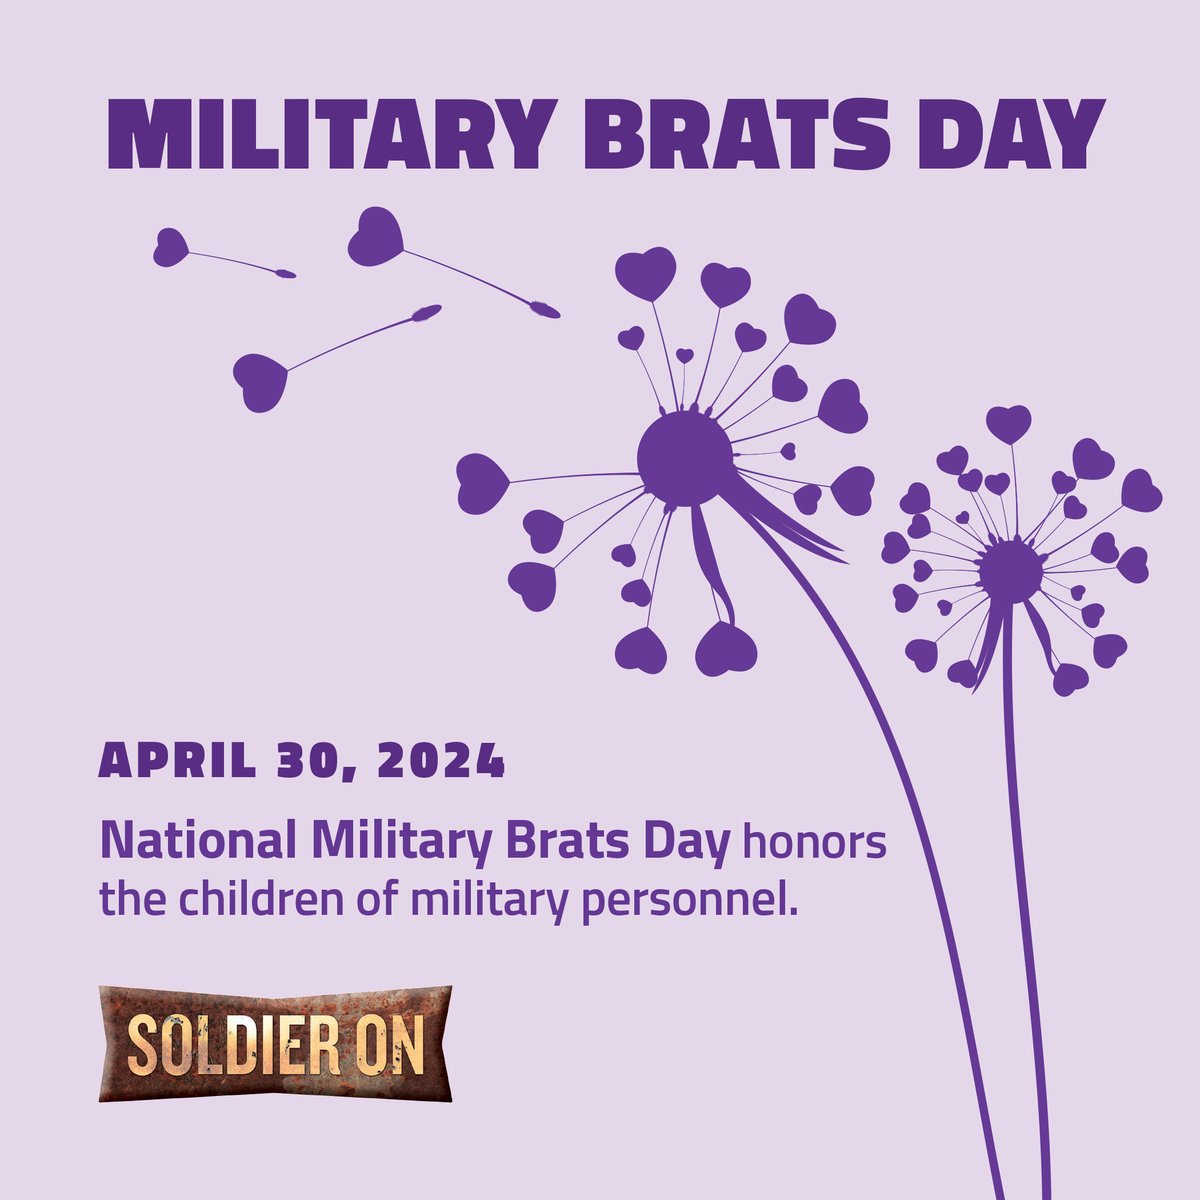 Roughly 1 in 25 Americans is a Military Brat. #NationalMilitaryBratsDay celebrates children of military personnel and all the sacrifices they have made.